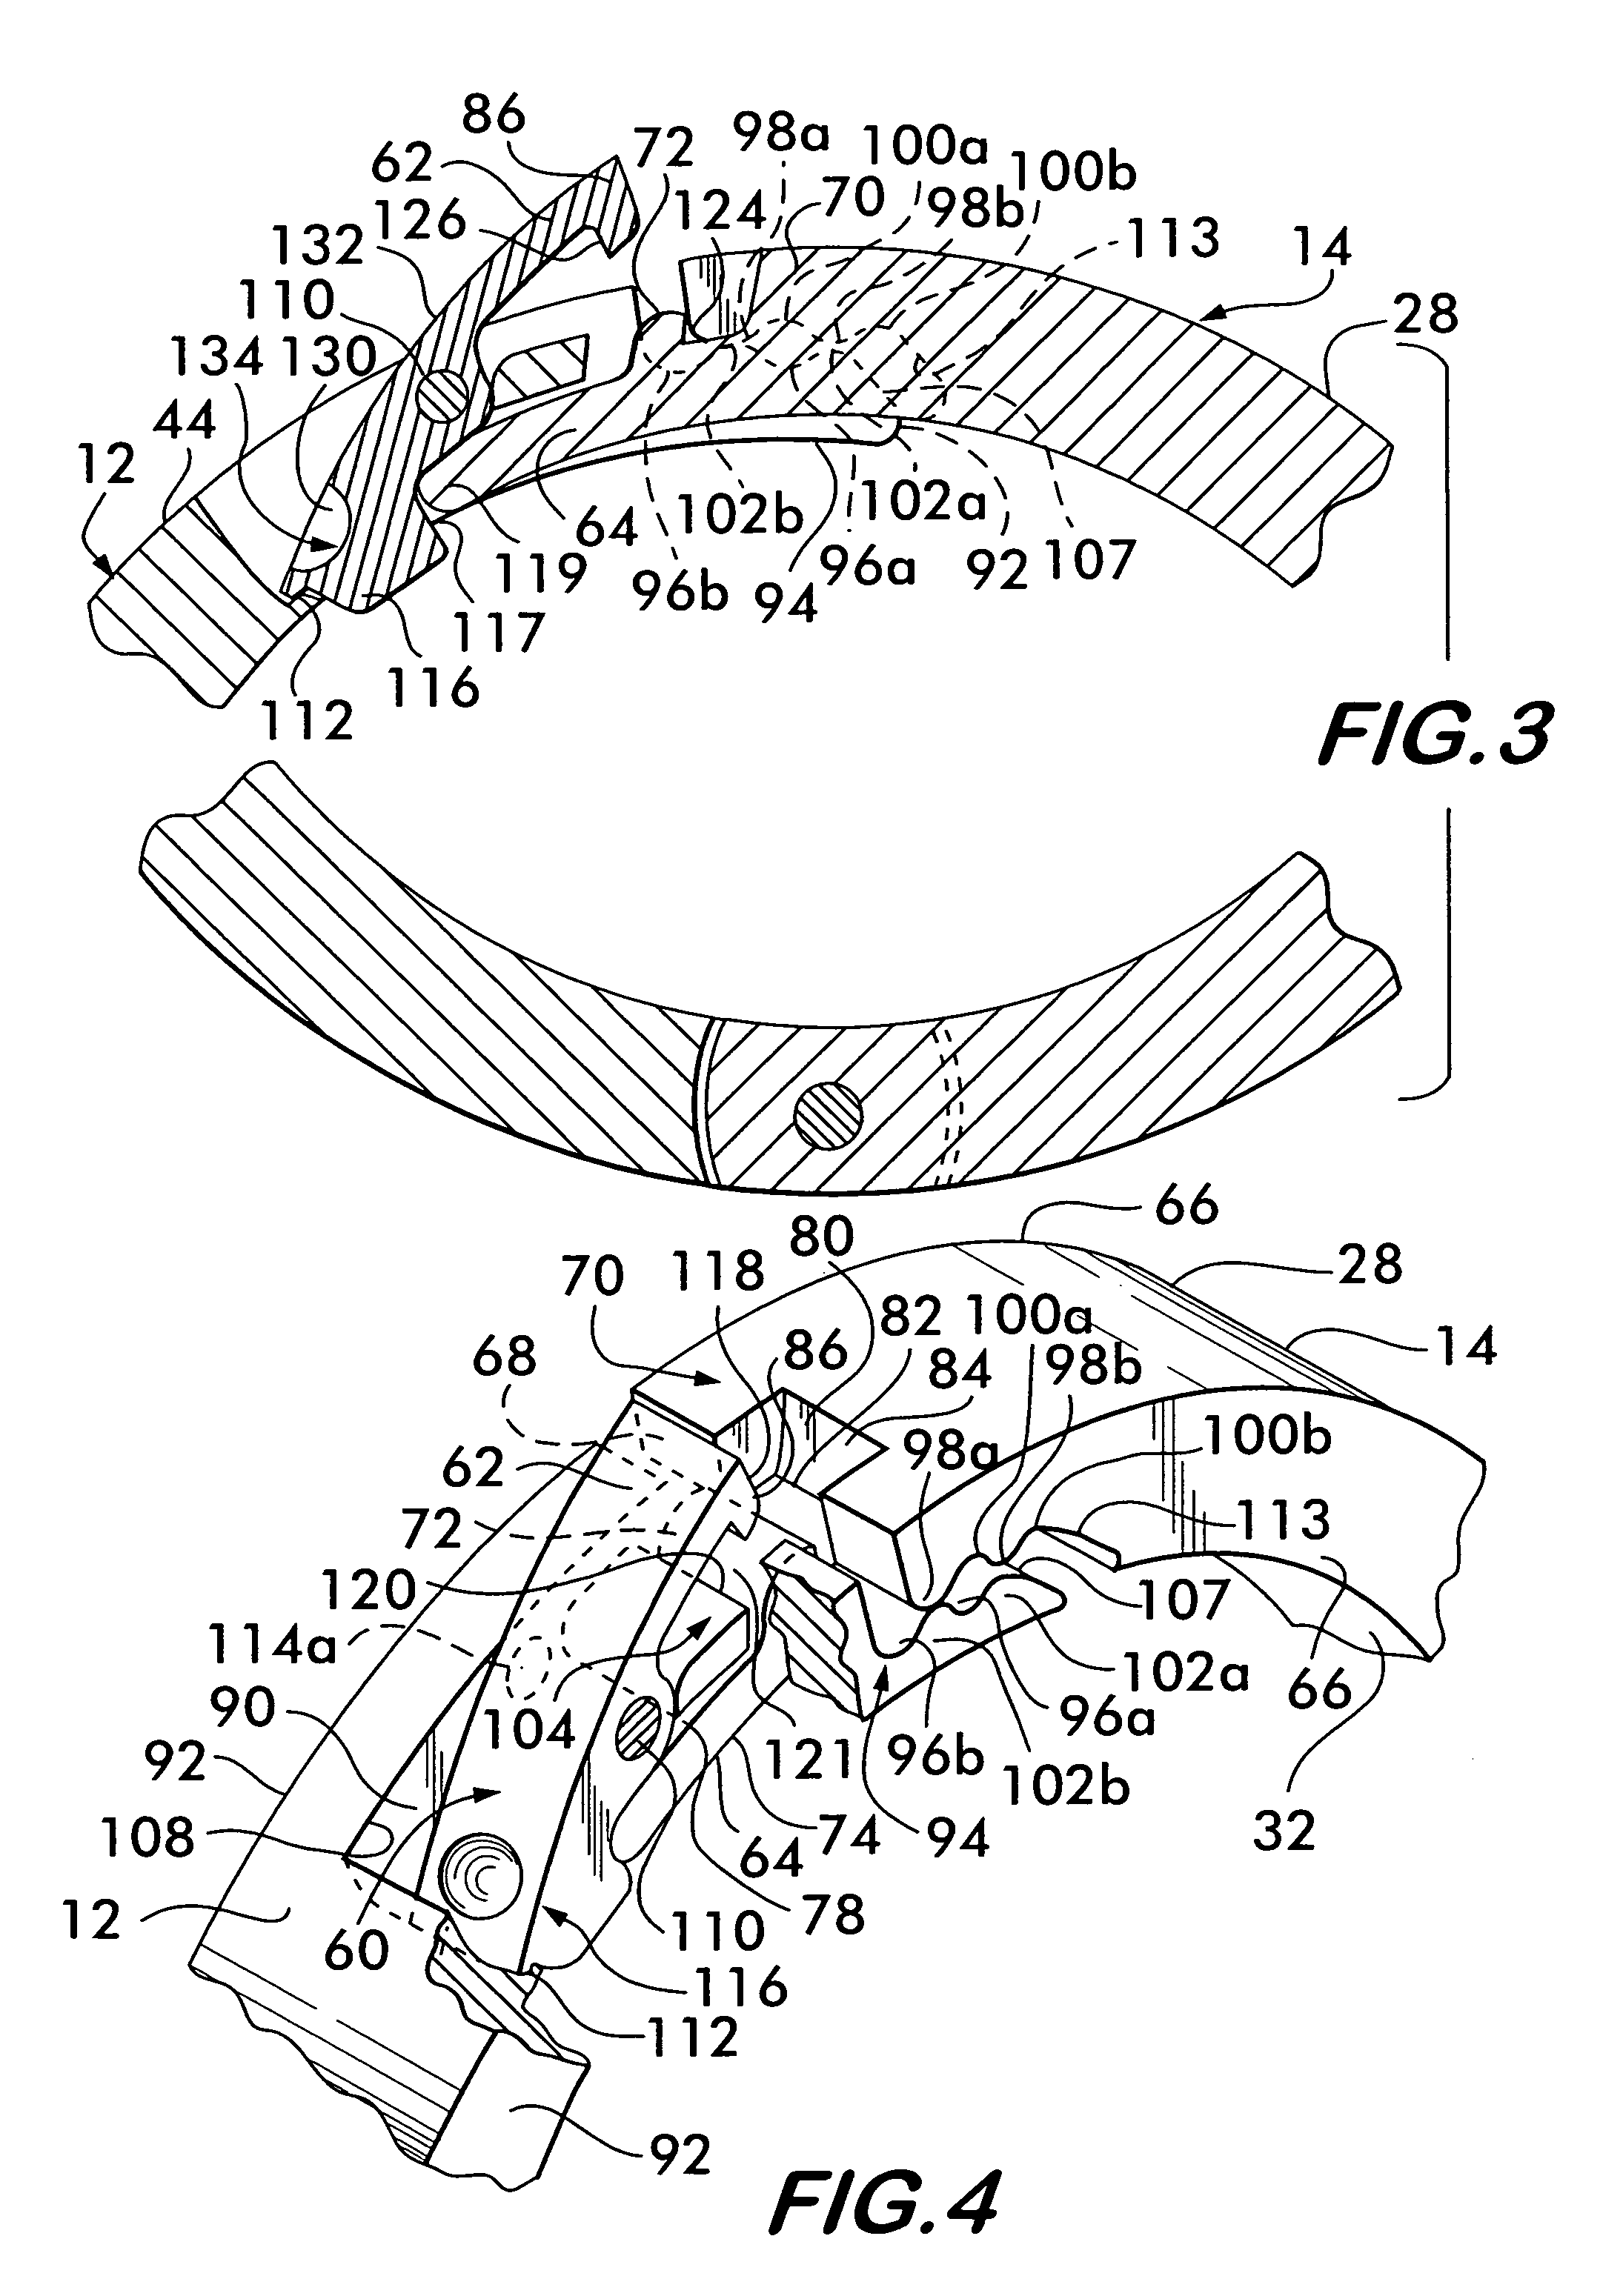 Openable ring with cooperating locking means